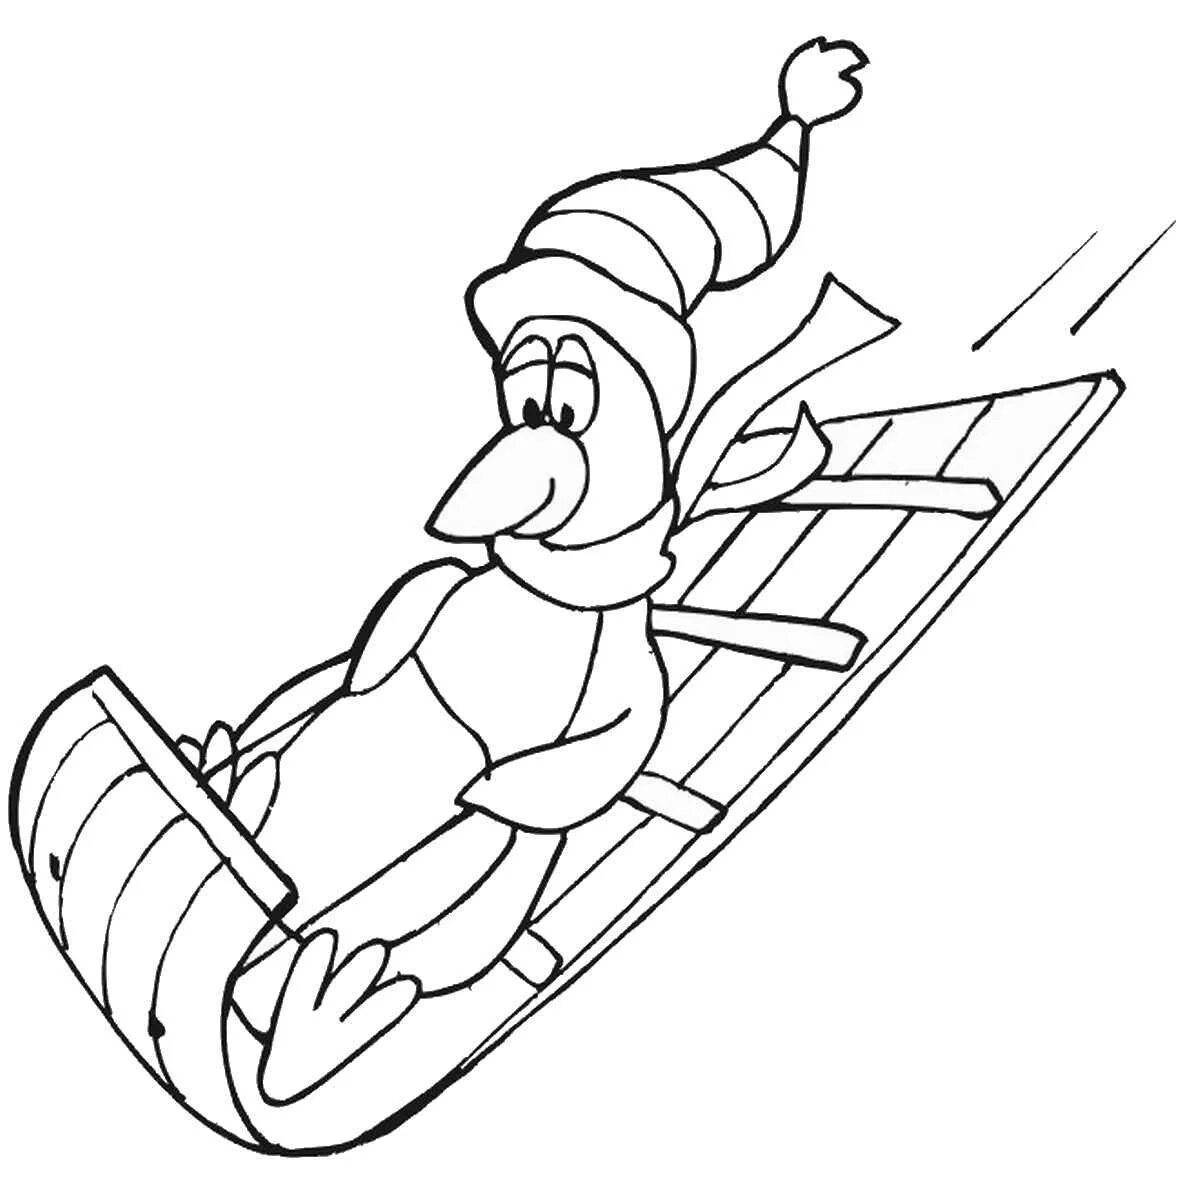 Snow Hill Live Coloring Page